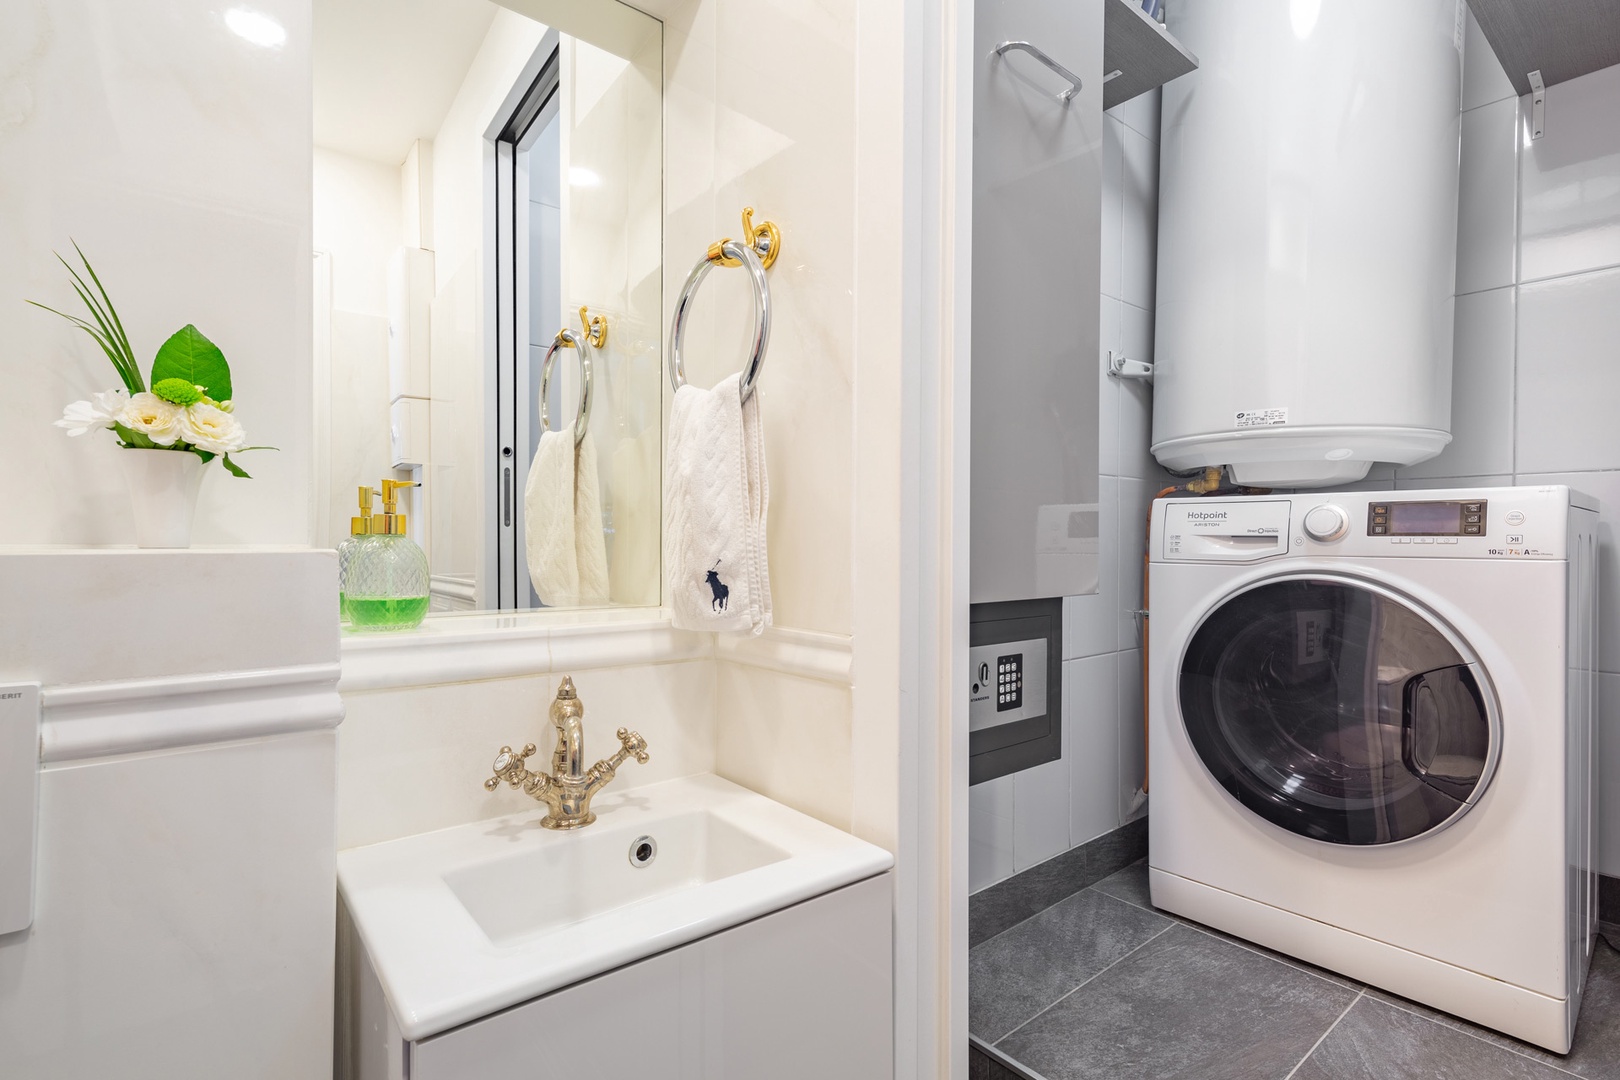 Laundry room is adjacent to the half-bath.